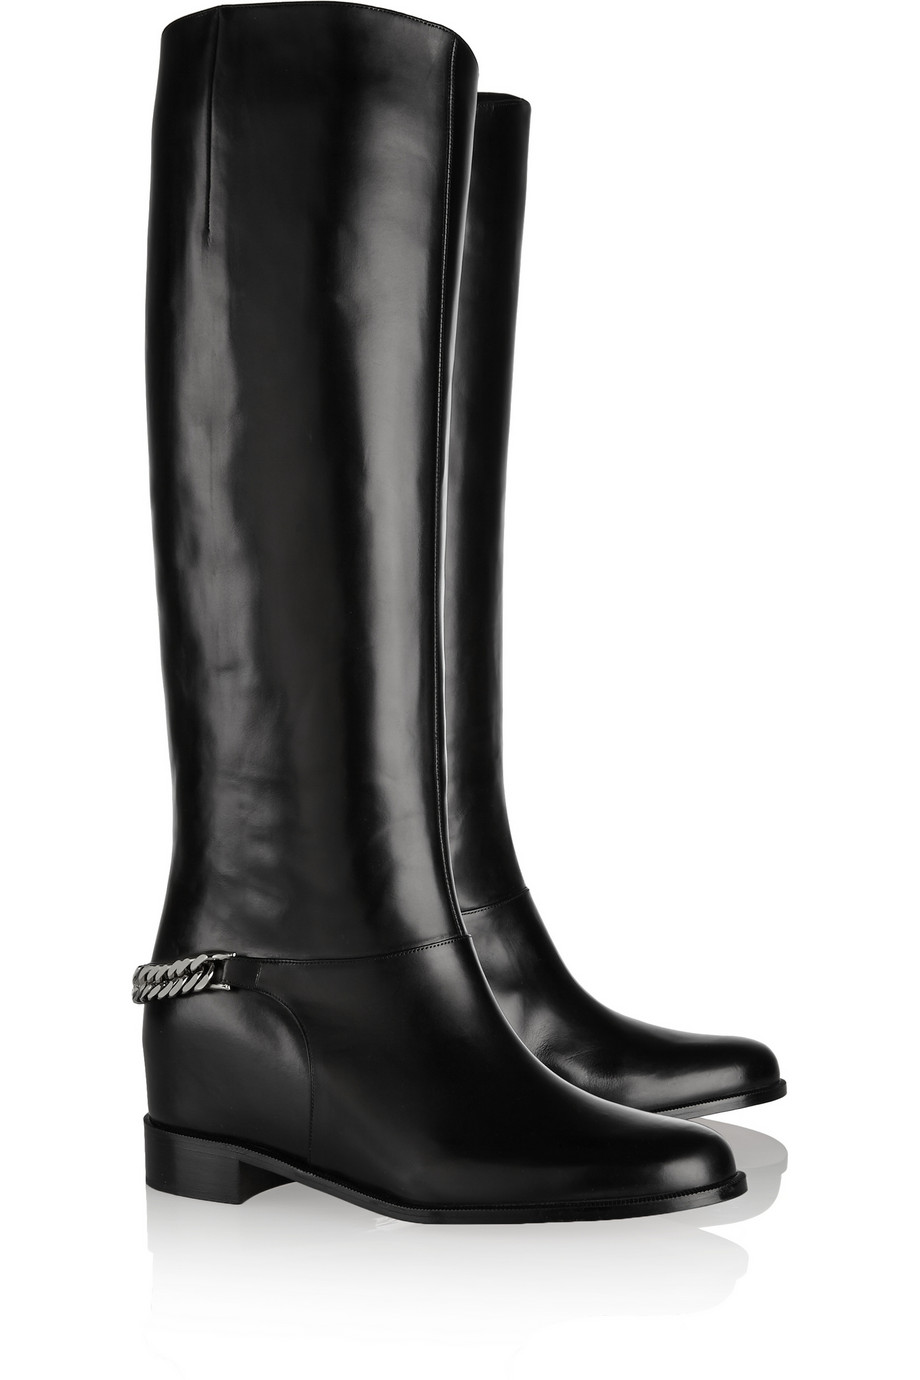 Christian Louboutin Cate Chain-Trimmed Leather Riding Boots in Black | Lyst